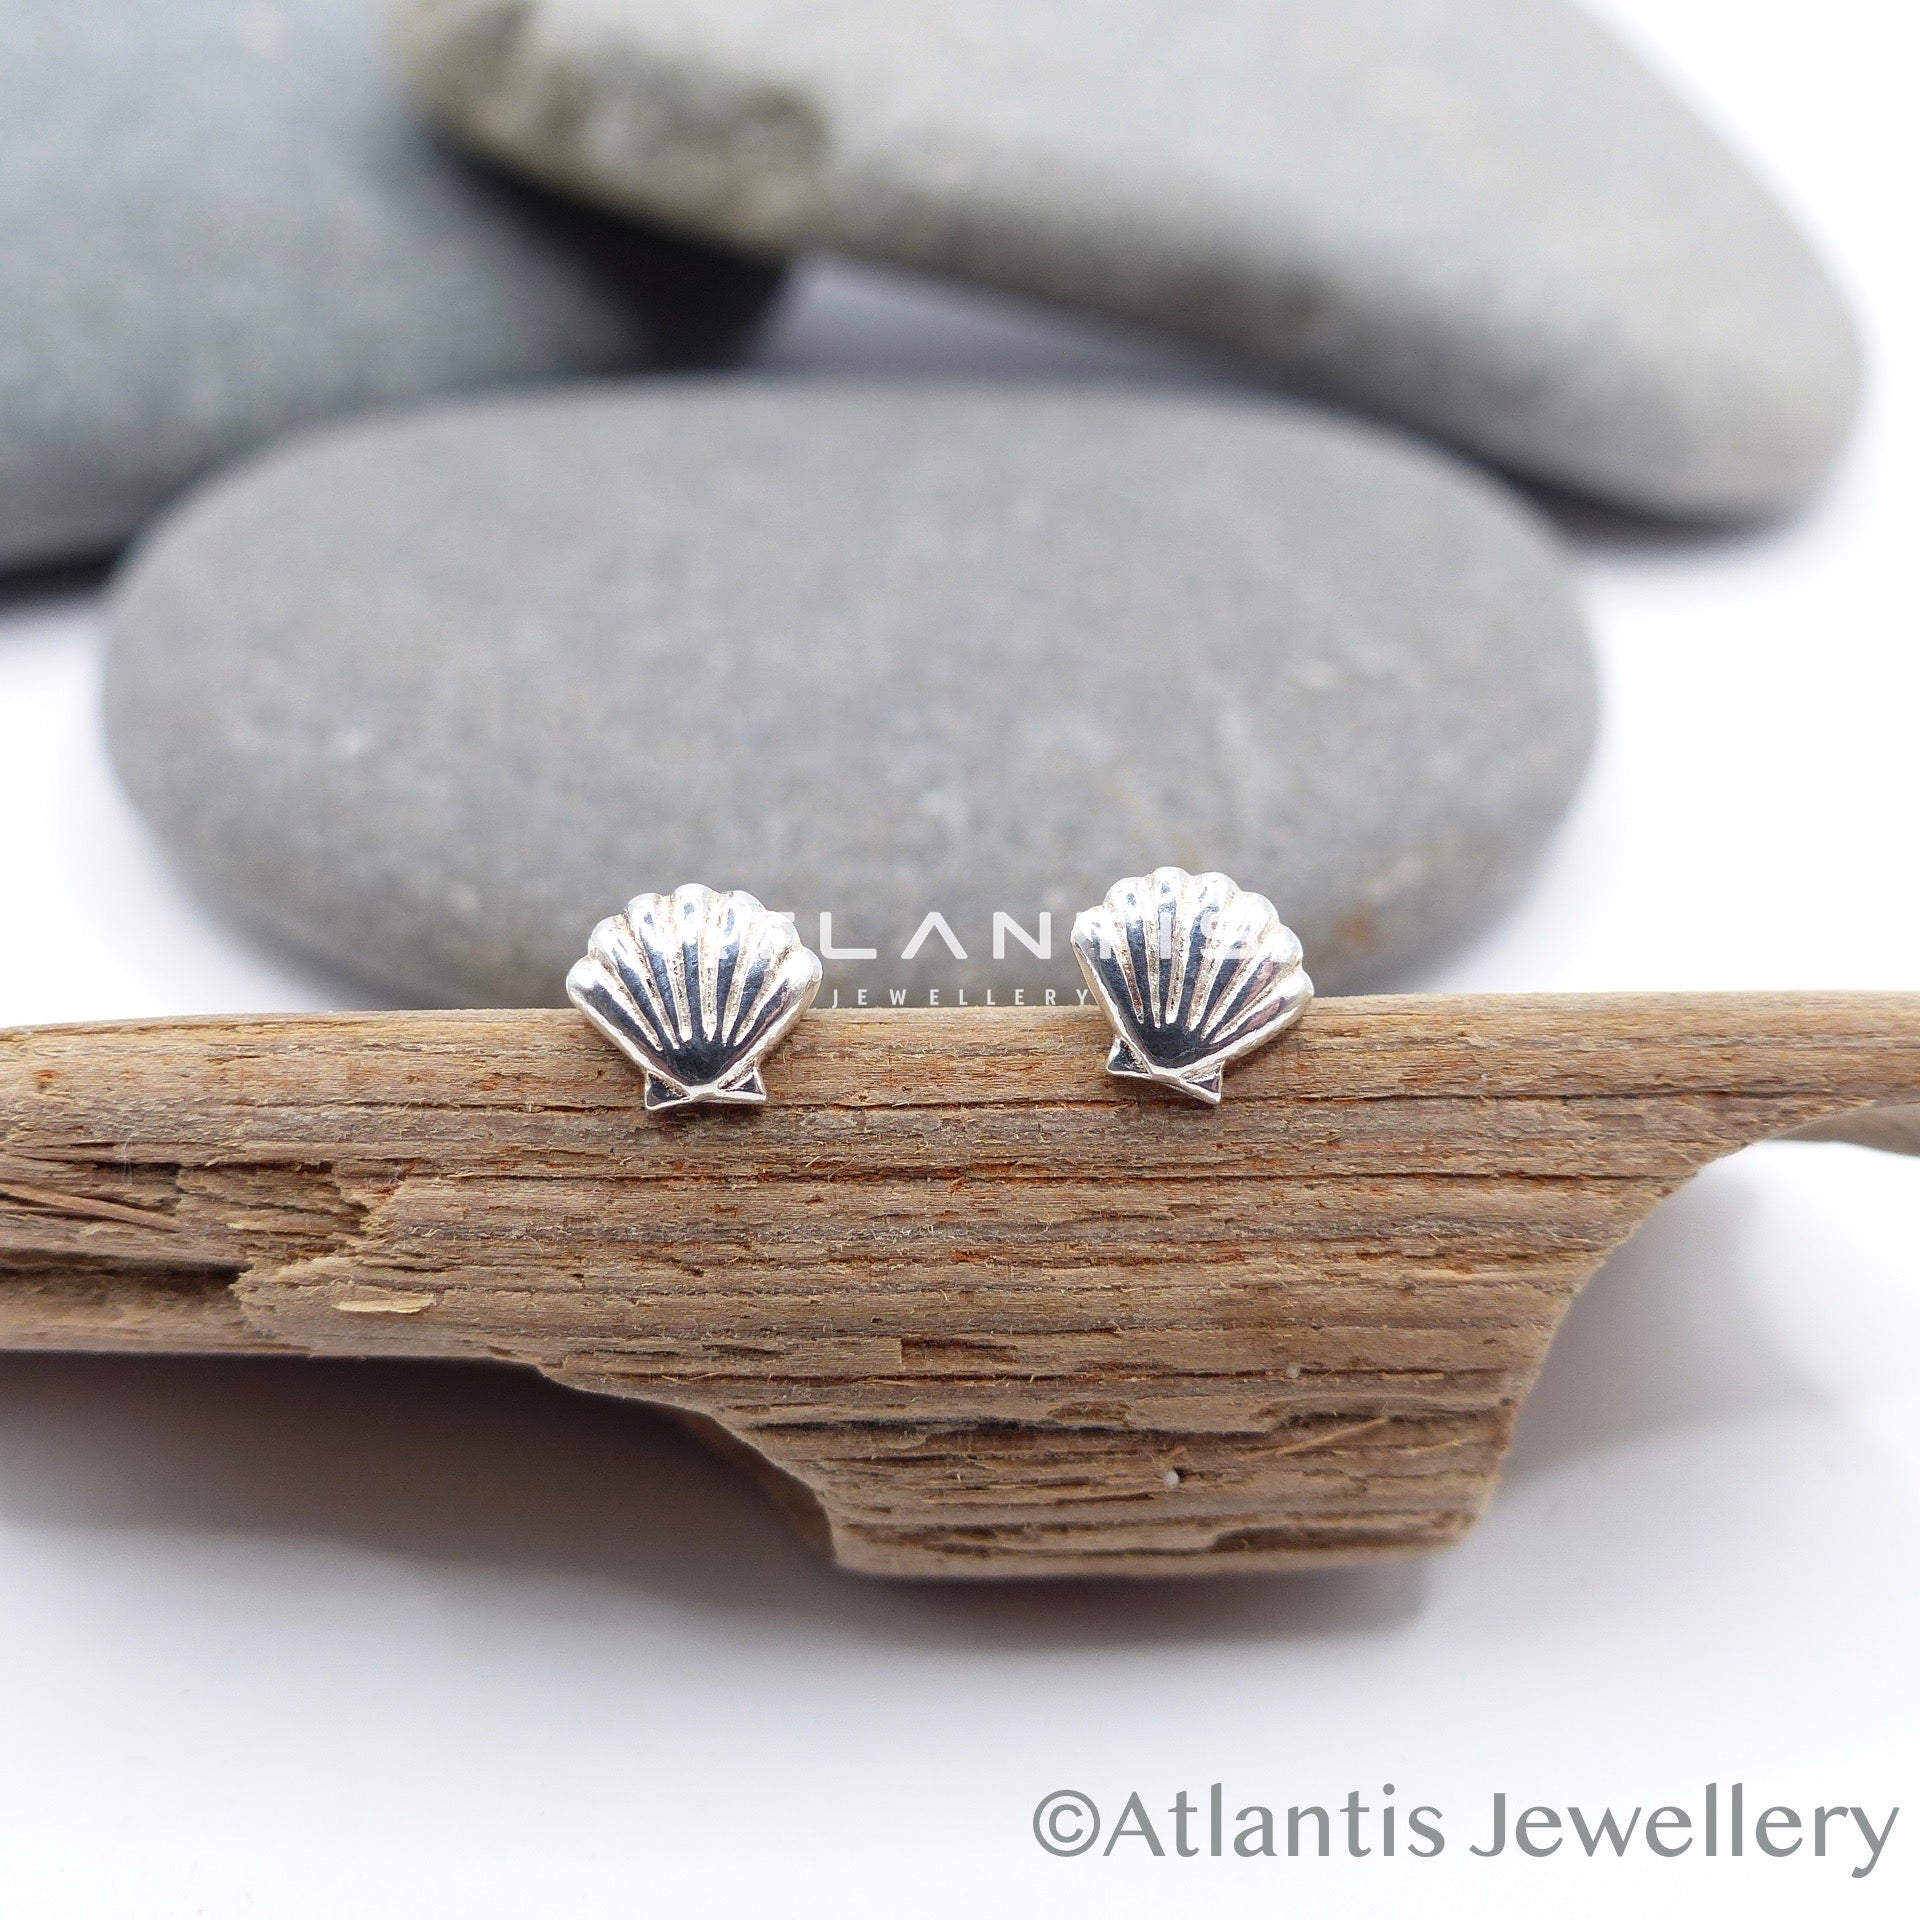 Shell Earrings in Sterling Silver with push back fastening.